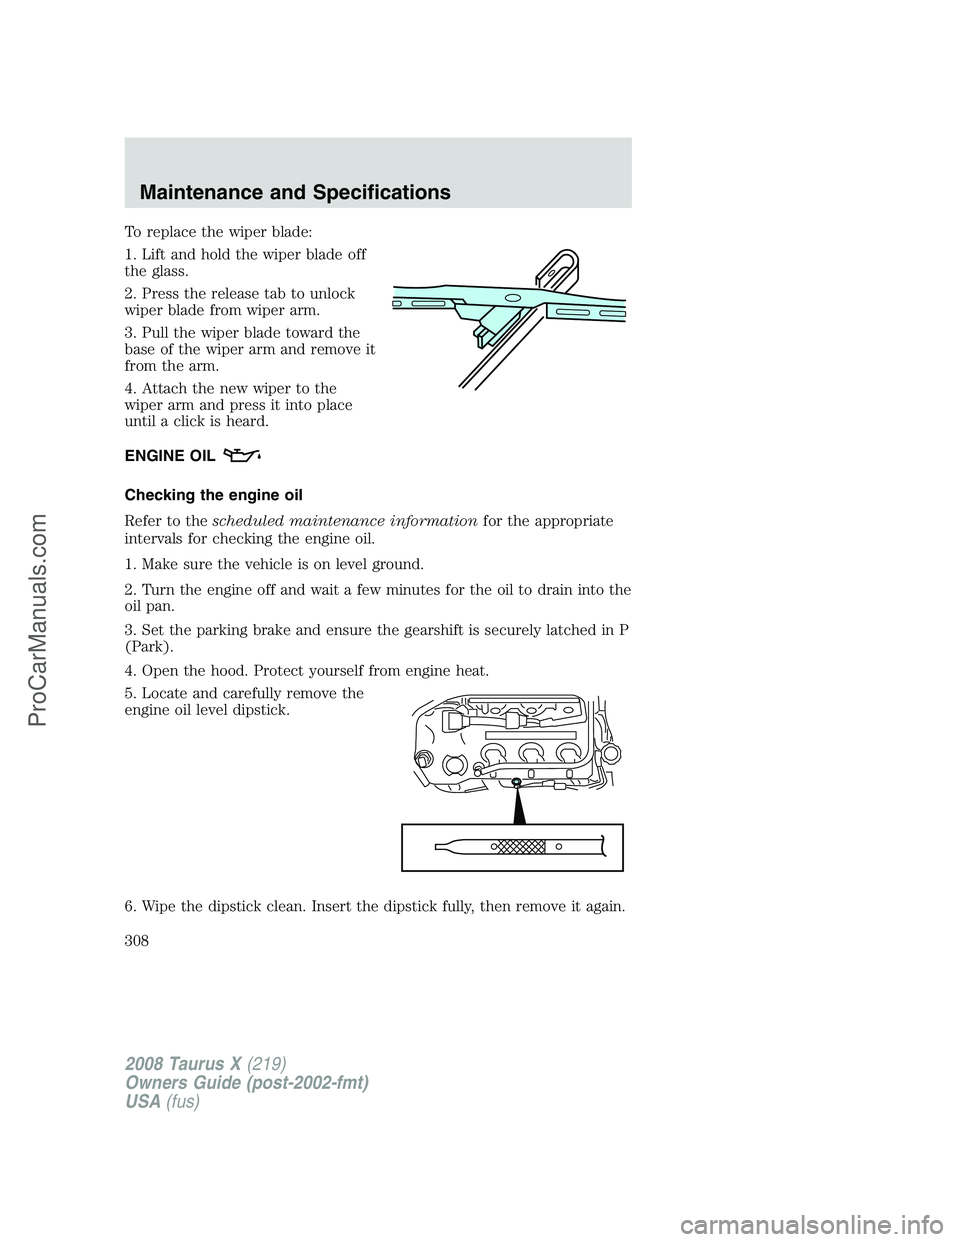 FORD FREESTYLE 2008  Owners Manual To replace the wiper blade:
1. Lift and hold the wiper blade off
the glass.
2. Press the release tab to unlock
wiper blade from wiper arm.
3. Pull the wiper blade toward the
base of the wiper arm and 